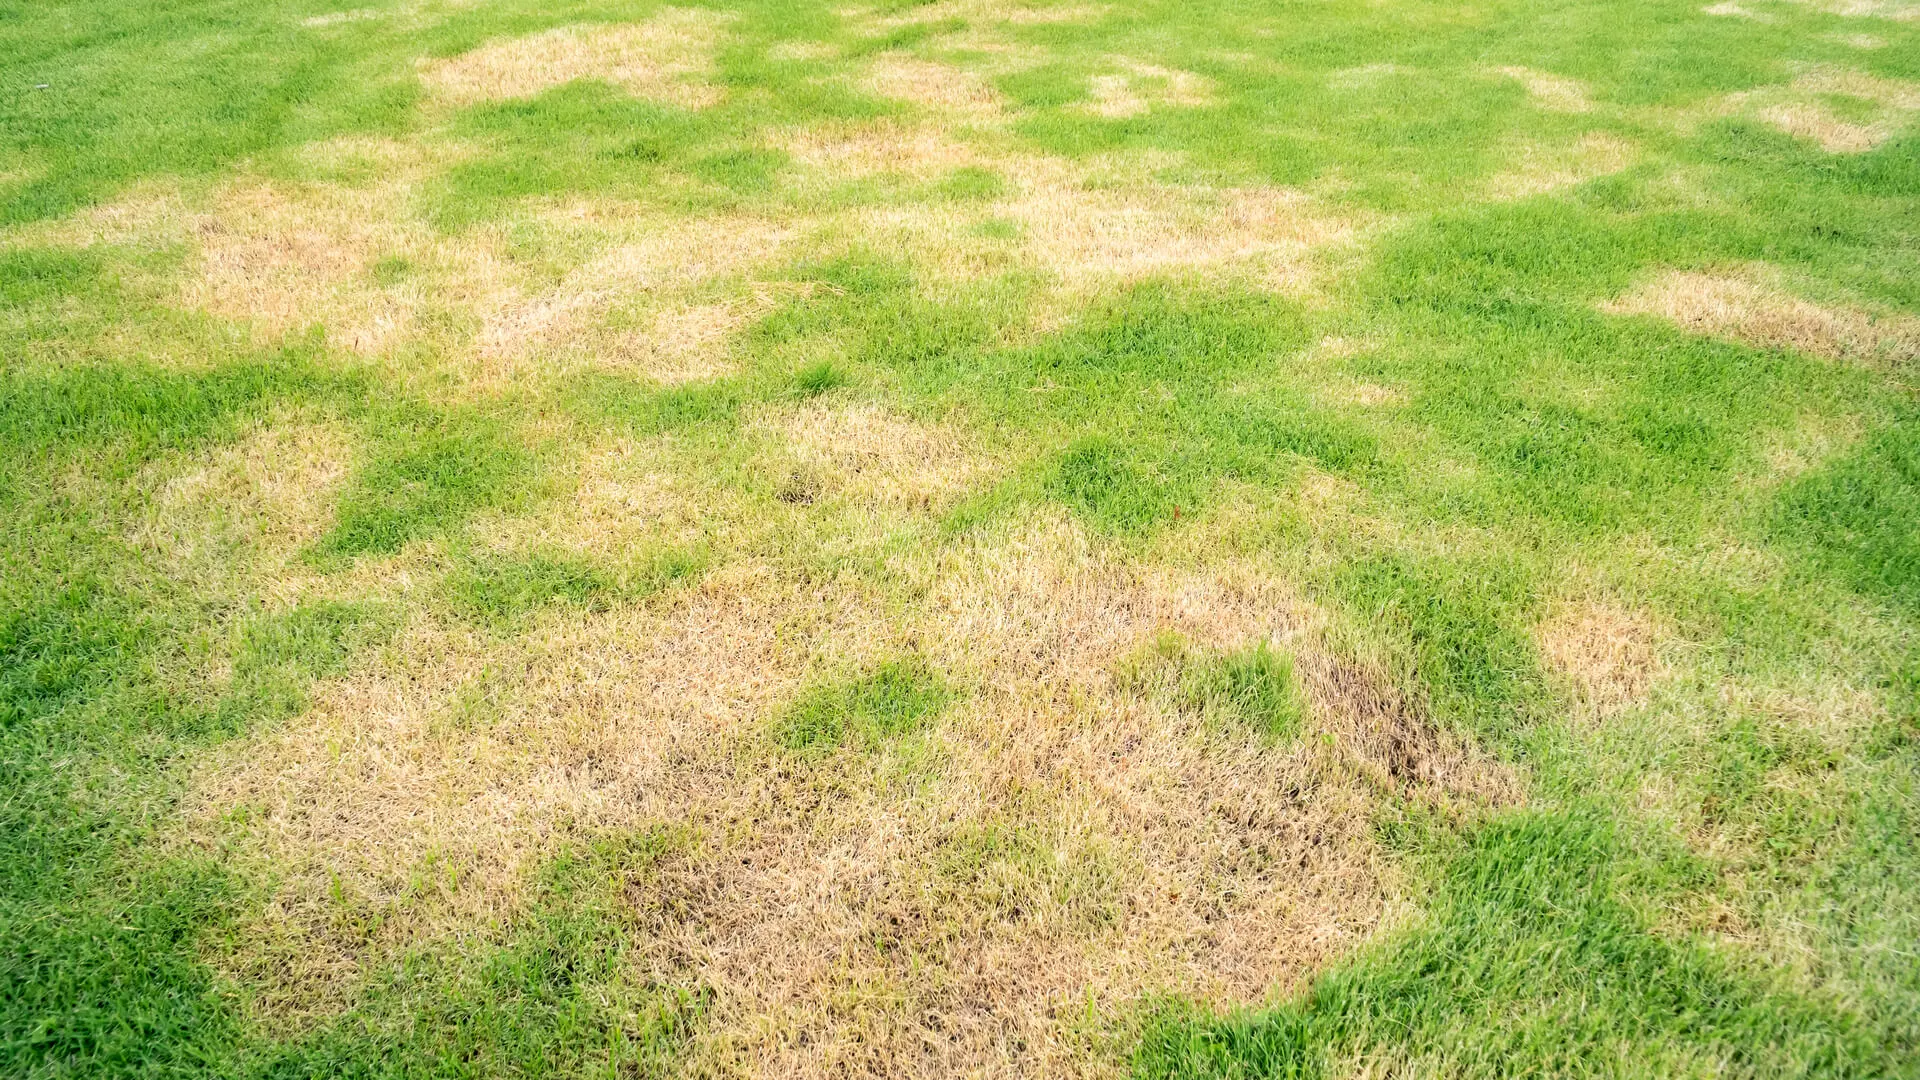 Intensive Lawn Care Murphy, TX Expert Advice to Manage Damaged Lawns